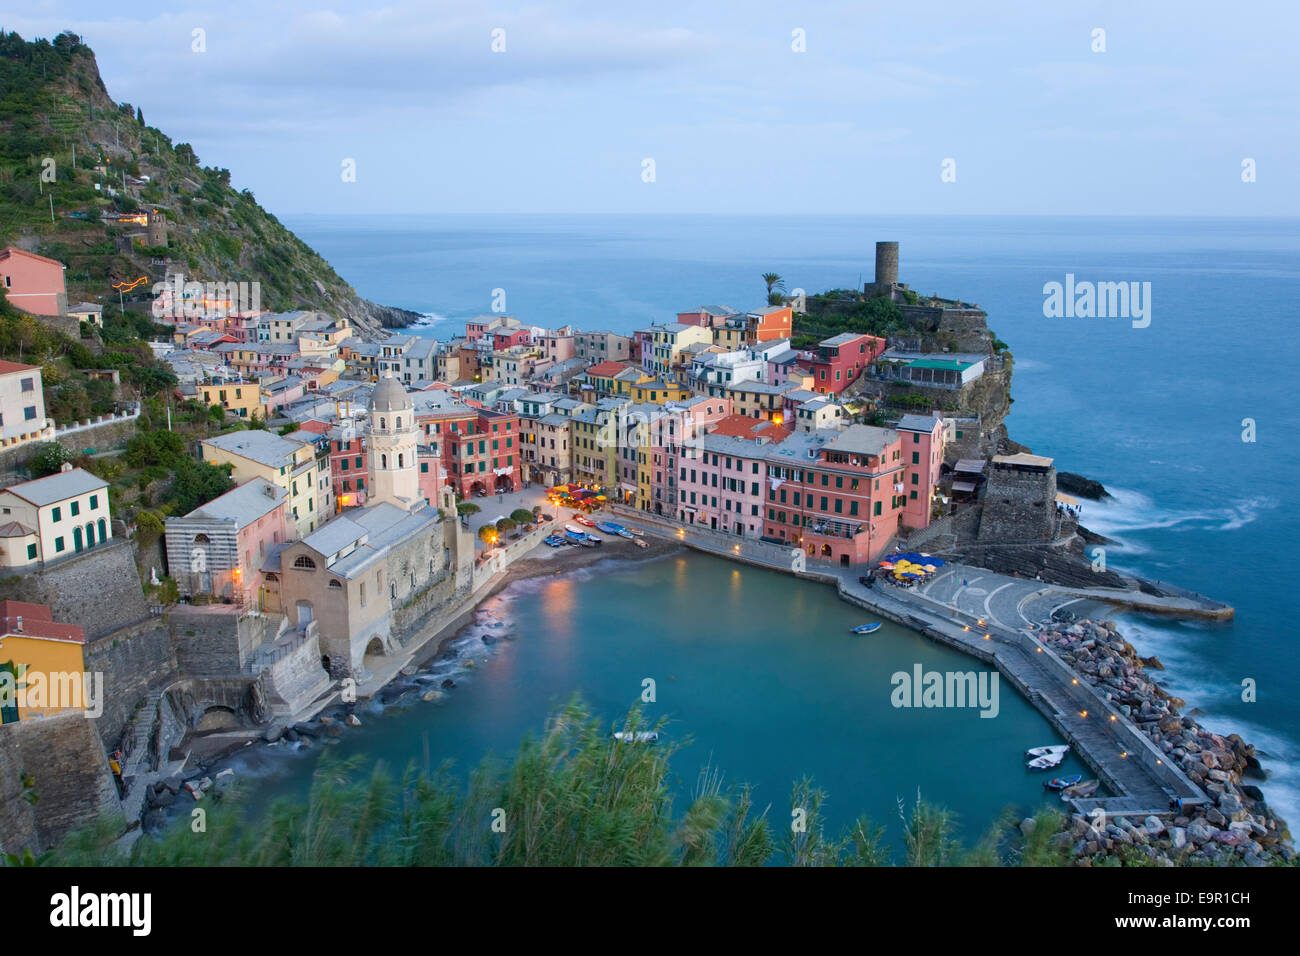 Vernazza, Cinque Terre National Park, Liguria, Italy. View over the colourful village and harbour at dusk. Stock Photo